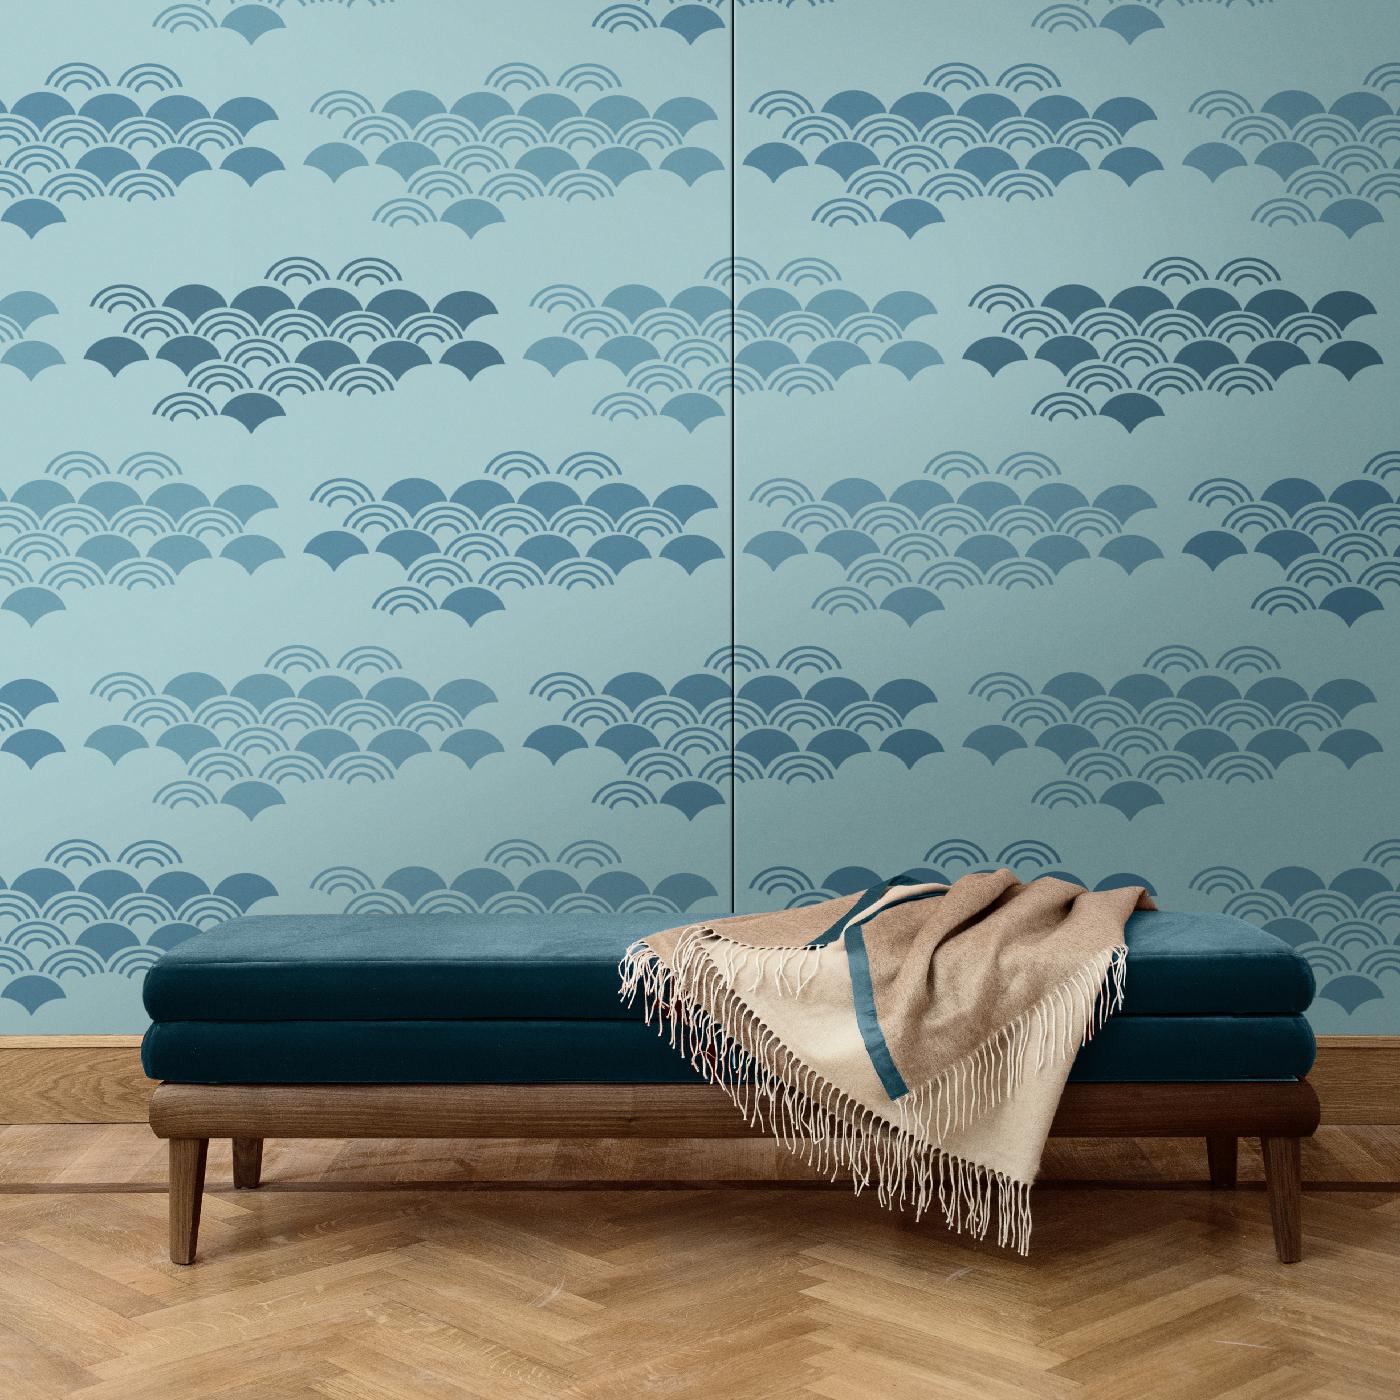 A delicate and modern interpretation of Japanese decorative patterns, this wall covering is a sophisticated addition to a contemporary interior. It was crafted of silk and cotton and boasts a tonal color palette of turquoise and green. It comes in